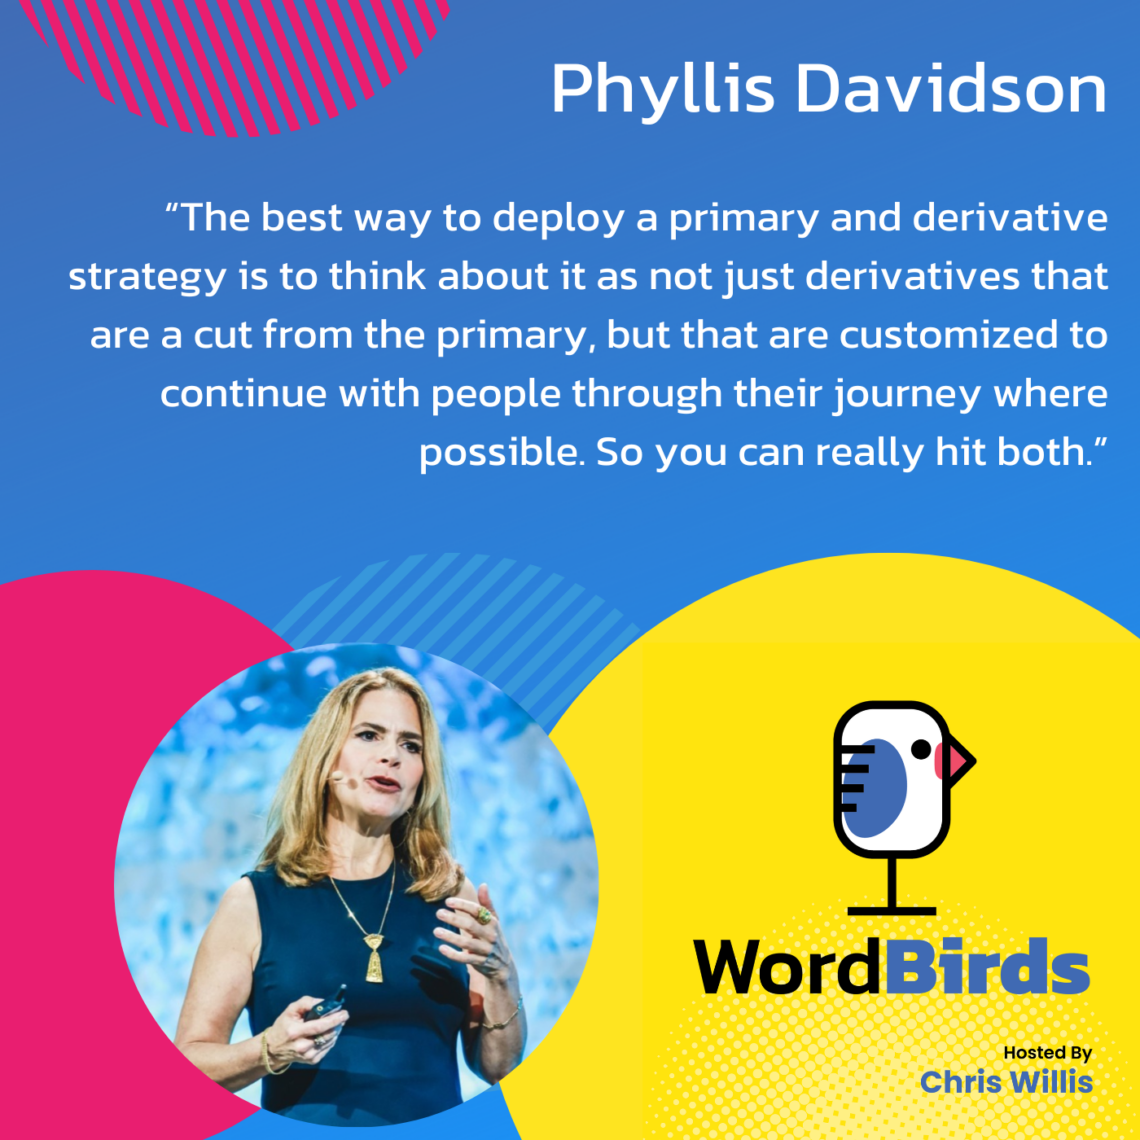 On a blue background there's a quote from Phyllis Davidson in white that takes up the majority of the image. The bottom of the image has a headshot image of Phyllis and the WordBirds Podcast logo.